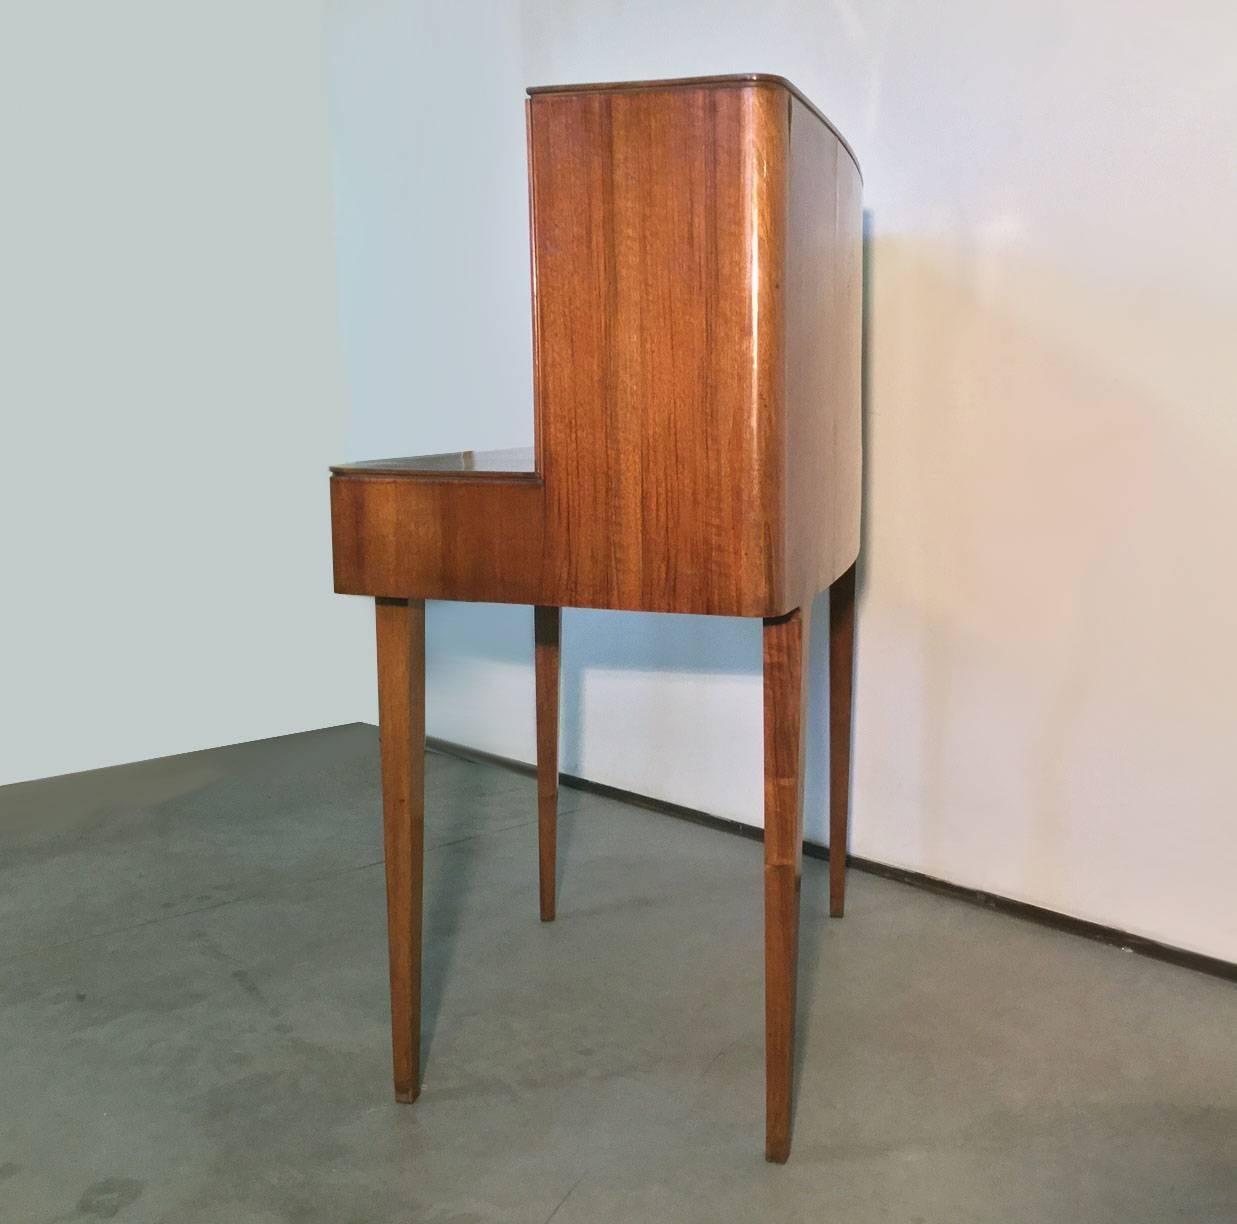 Mid-20th Century Beautiful Curved Desk Attributed to Guglielmo Ulrich, 1940 For Sale